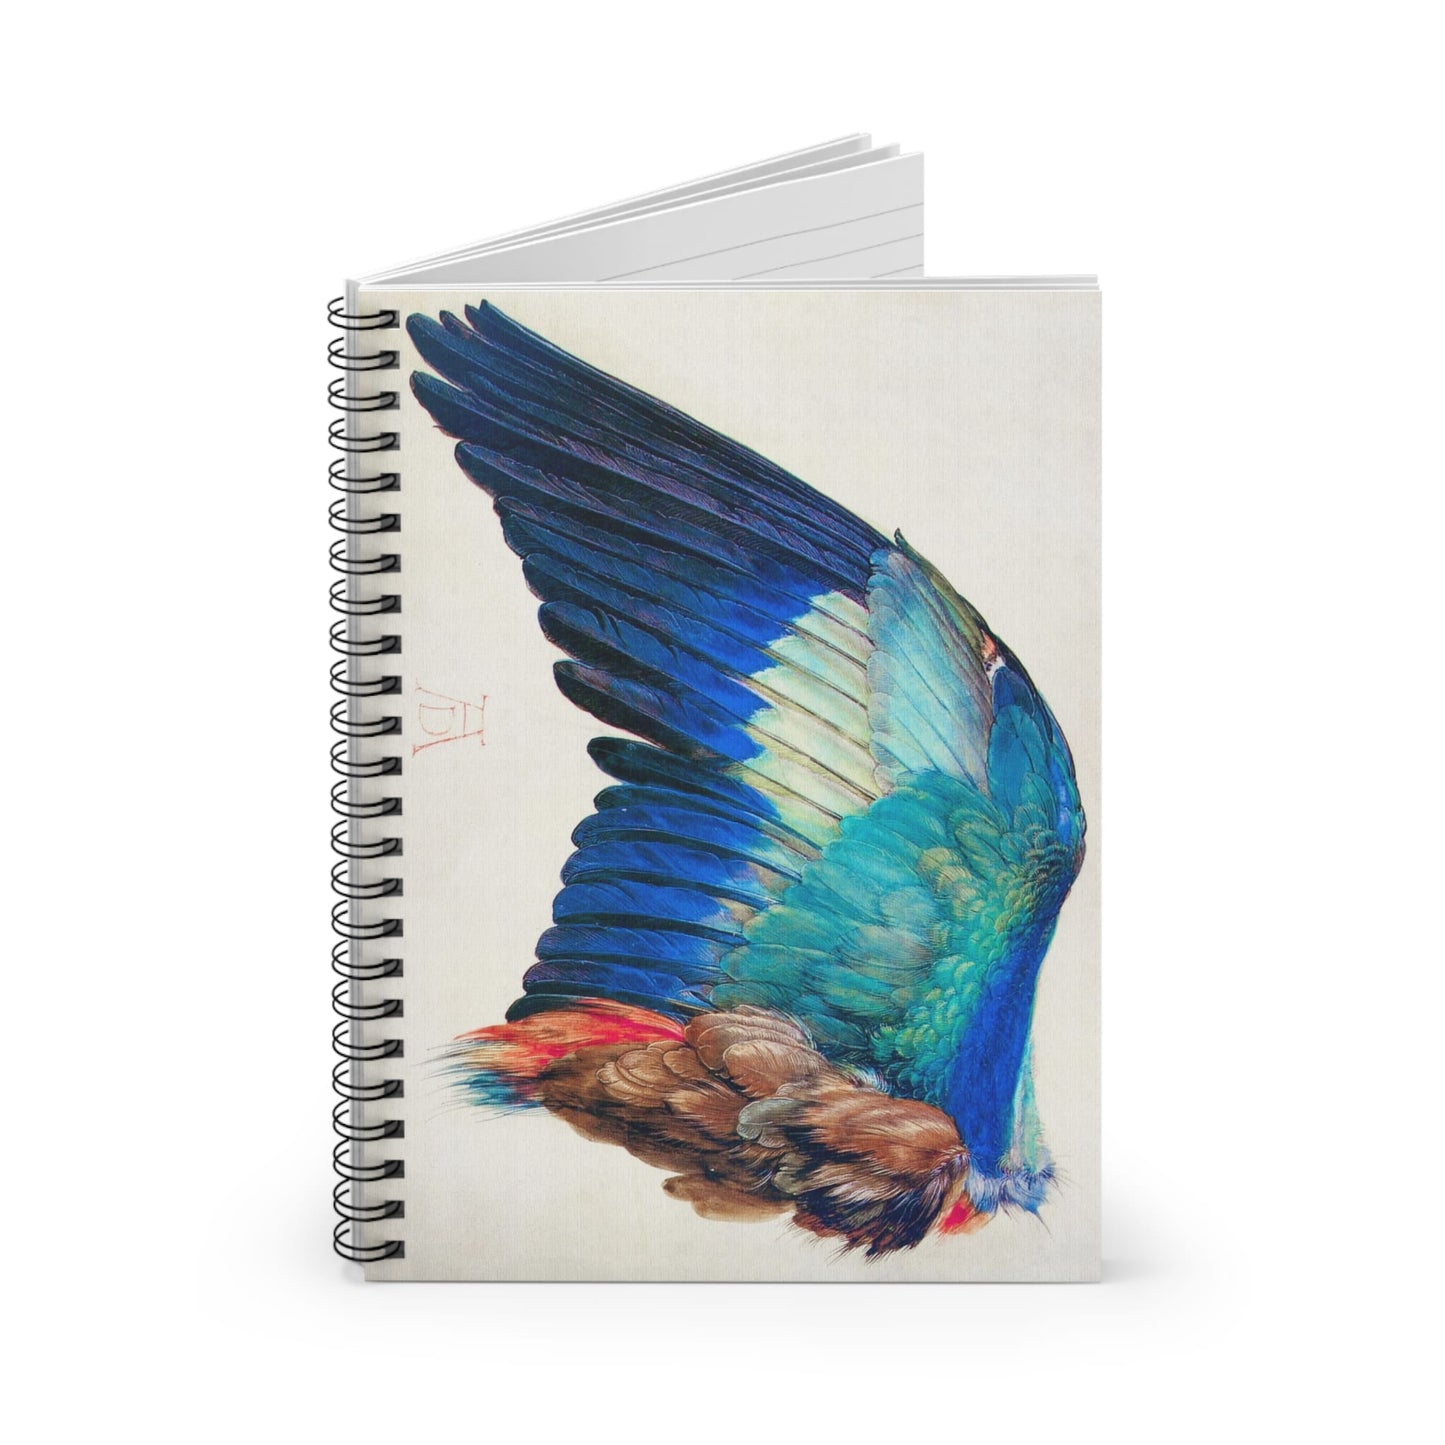 Aesthetic Wing Spiral Notebook Standing up on White Desk